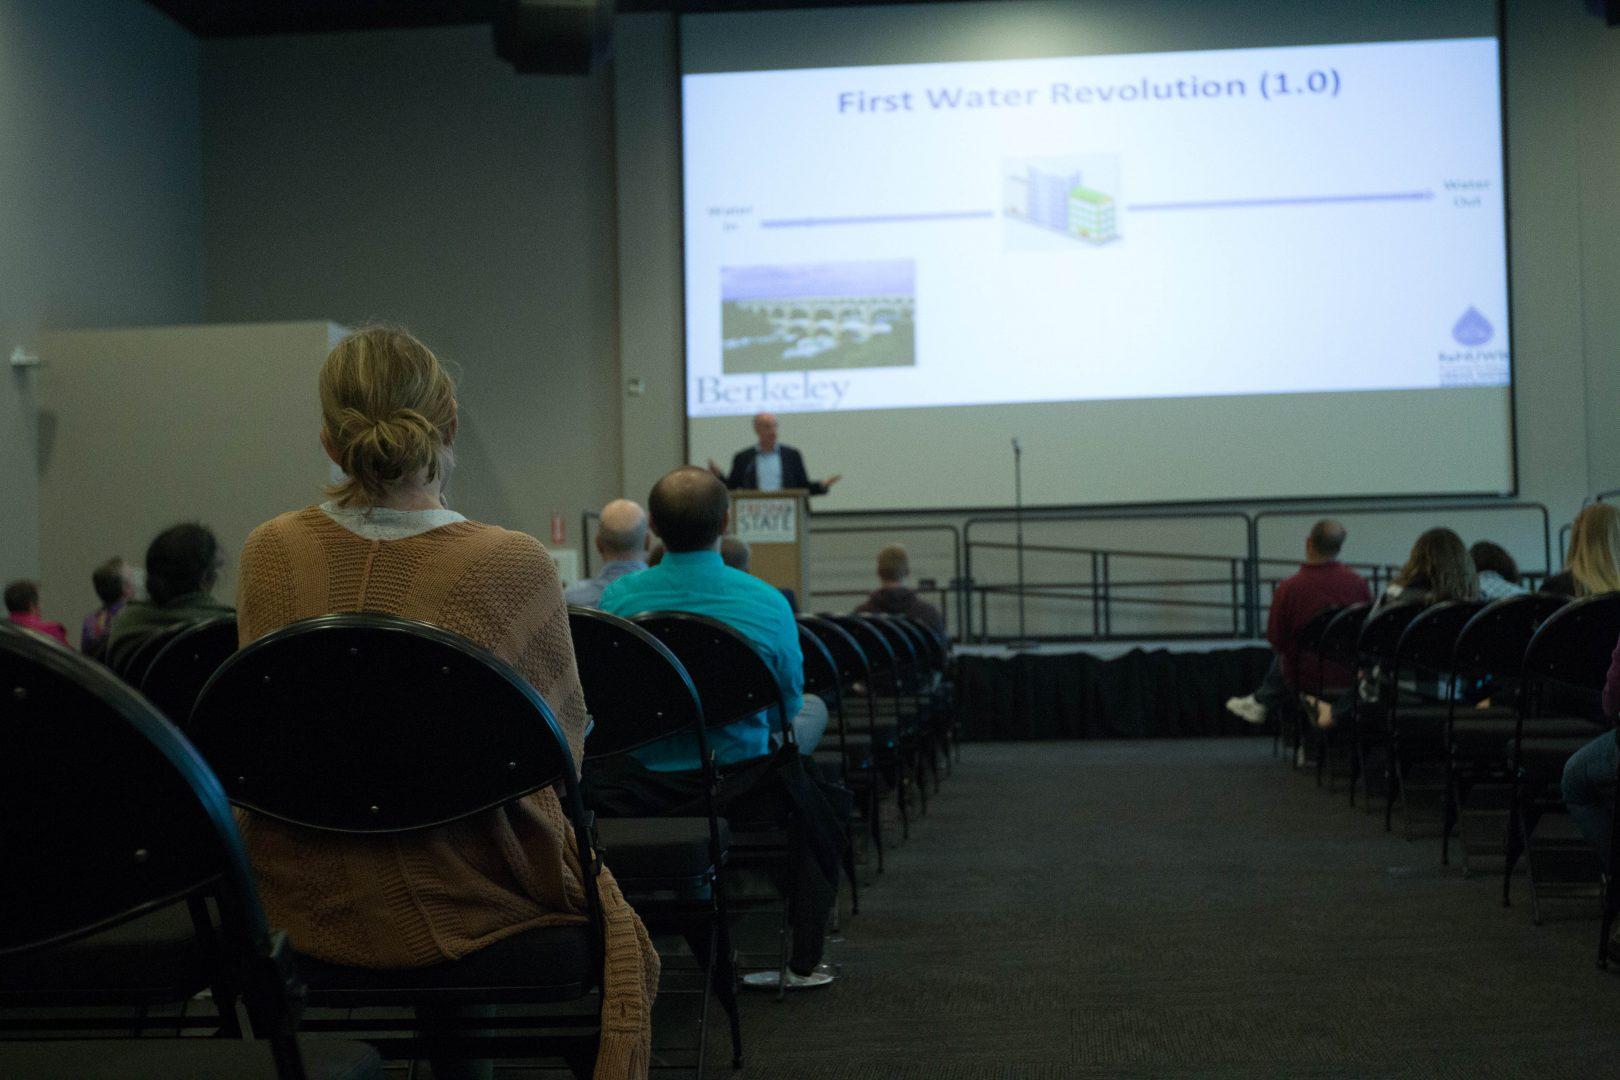 David Sedlak delivers a lecture in the North Gym at Fresno State on water consumption, usage, and preservation on April 12, 2018. (Aly Honore/The Collegian)